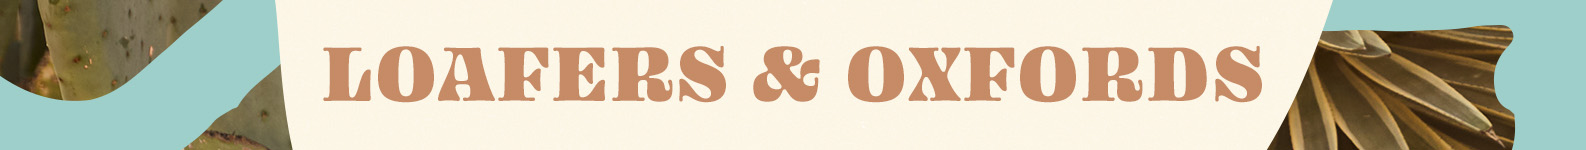 Loafers And Oxfords brand header image